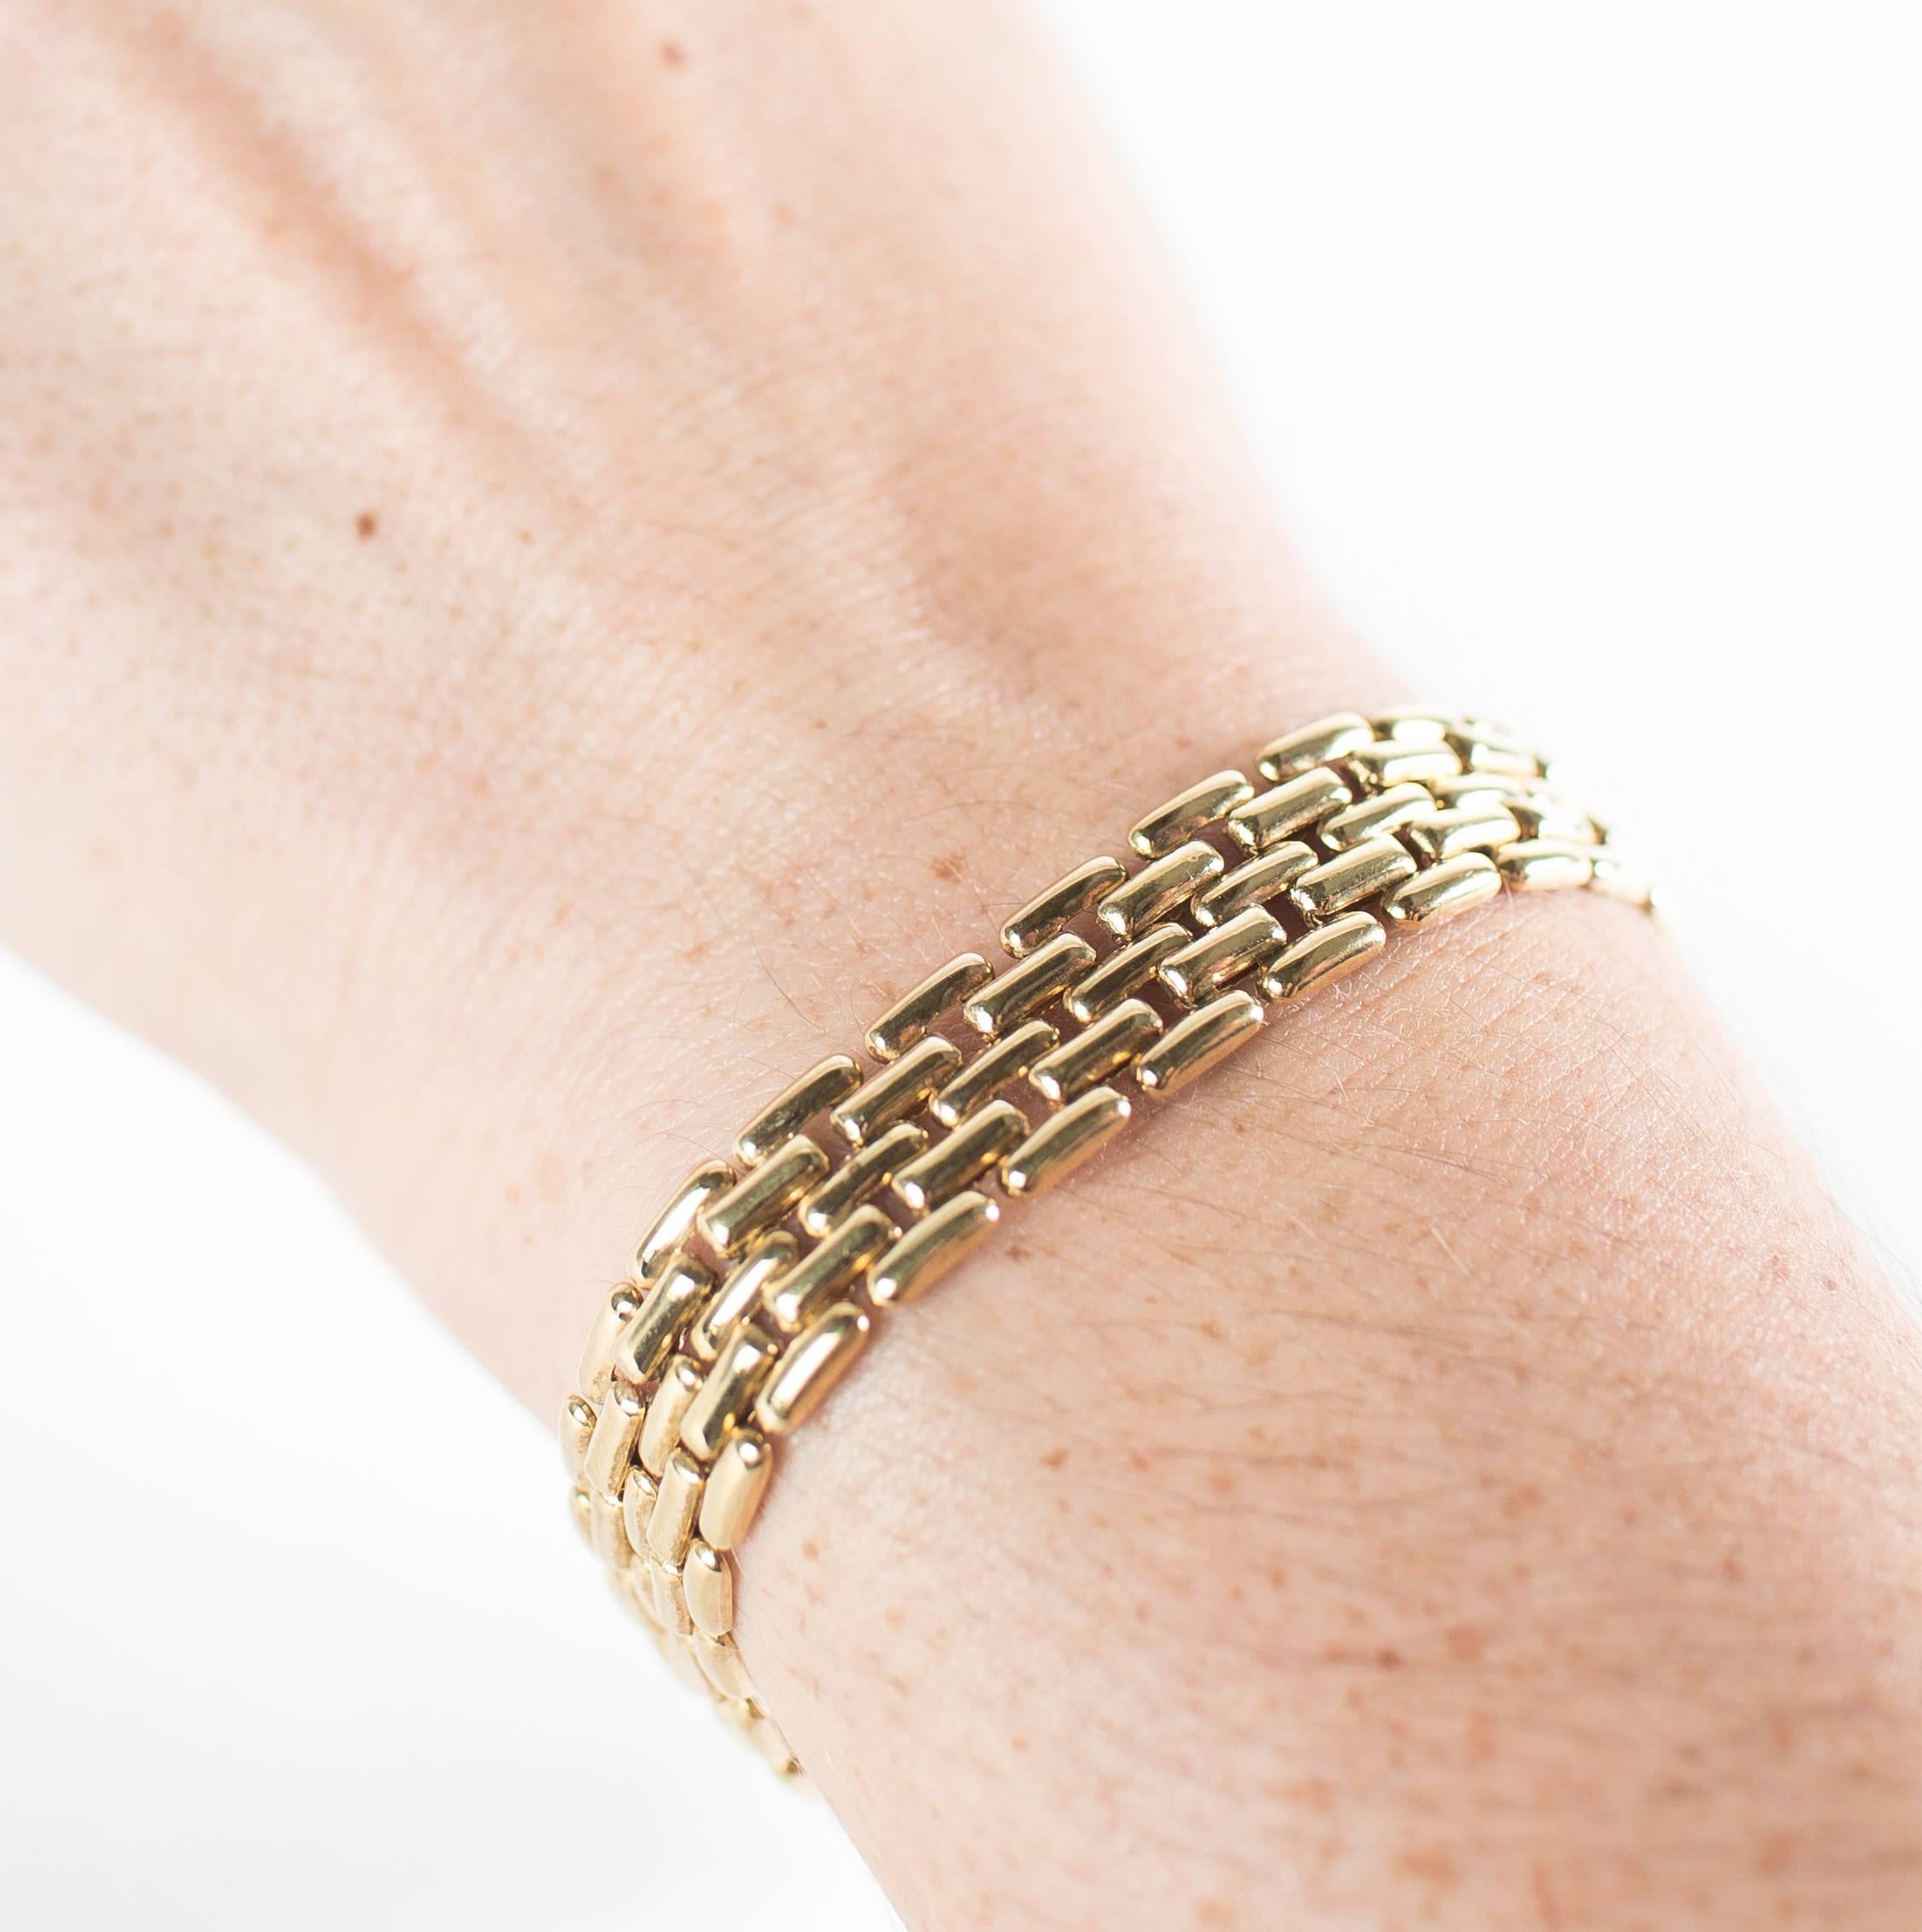 Yellow Gold Bracelet in braided pattern.  It's a lovely delicate braided pattern that is 7/16 wide, the bracelet is 7 inches long.  It has a box clasp and then a s safely lock to keep it securely on your wrist.  This Glowing 14Kt yellow gold